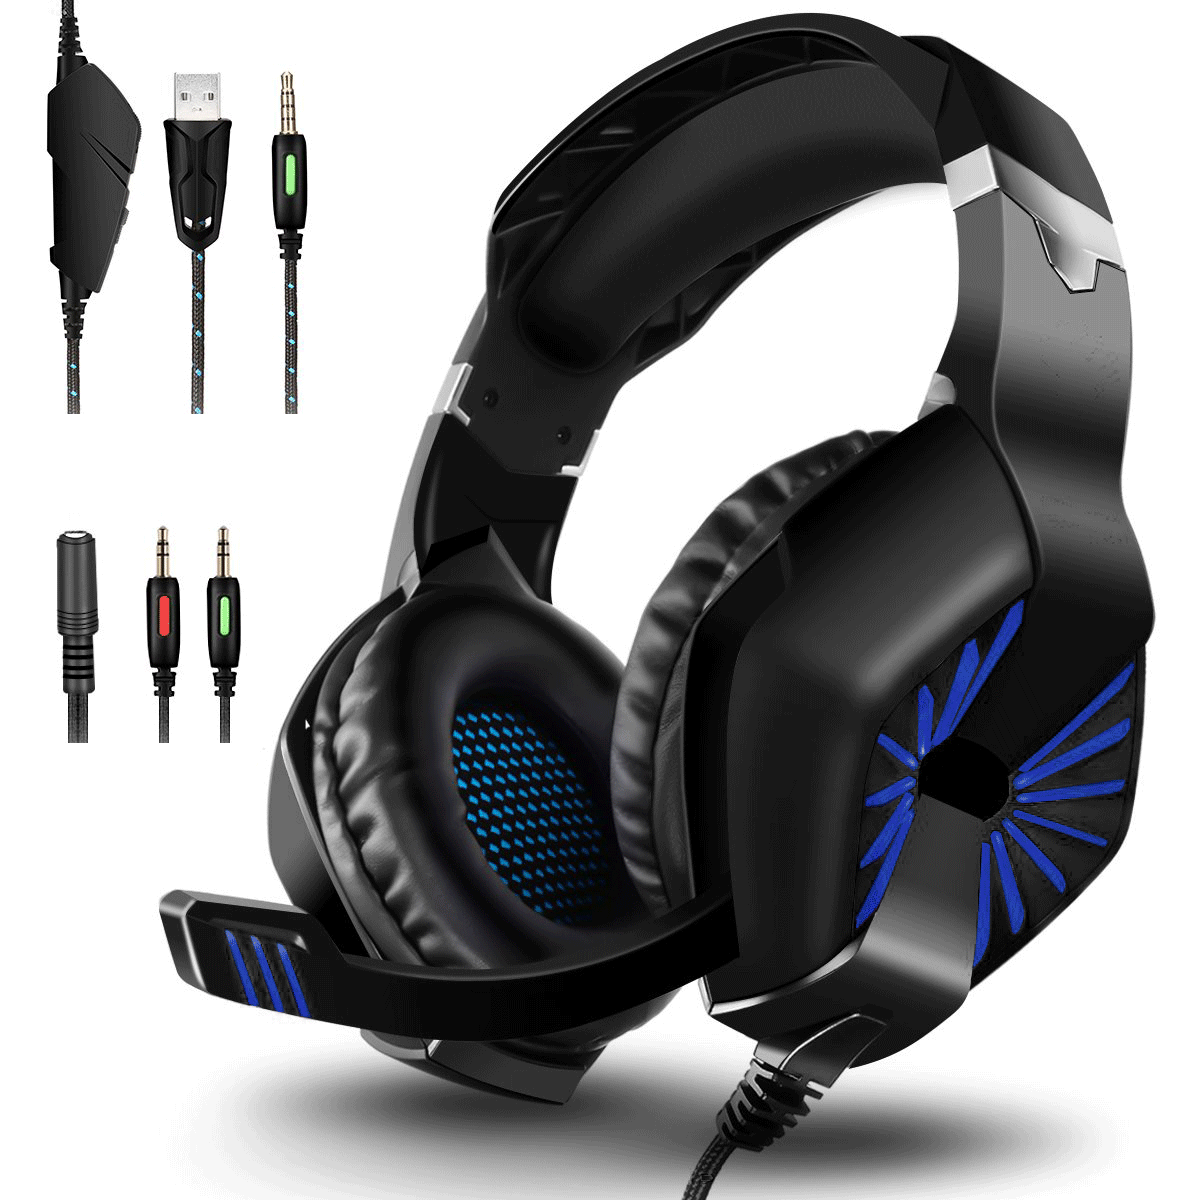 Bluetooth Connectivity Wireless Headsets Built-in Mic Bass Surround Sound Volume Control Breathable Earcups Foldable Led Light Gaming Headset-Black